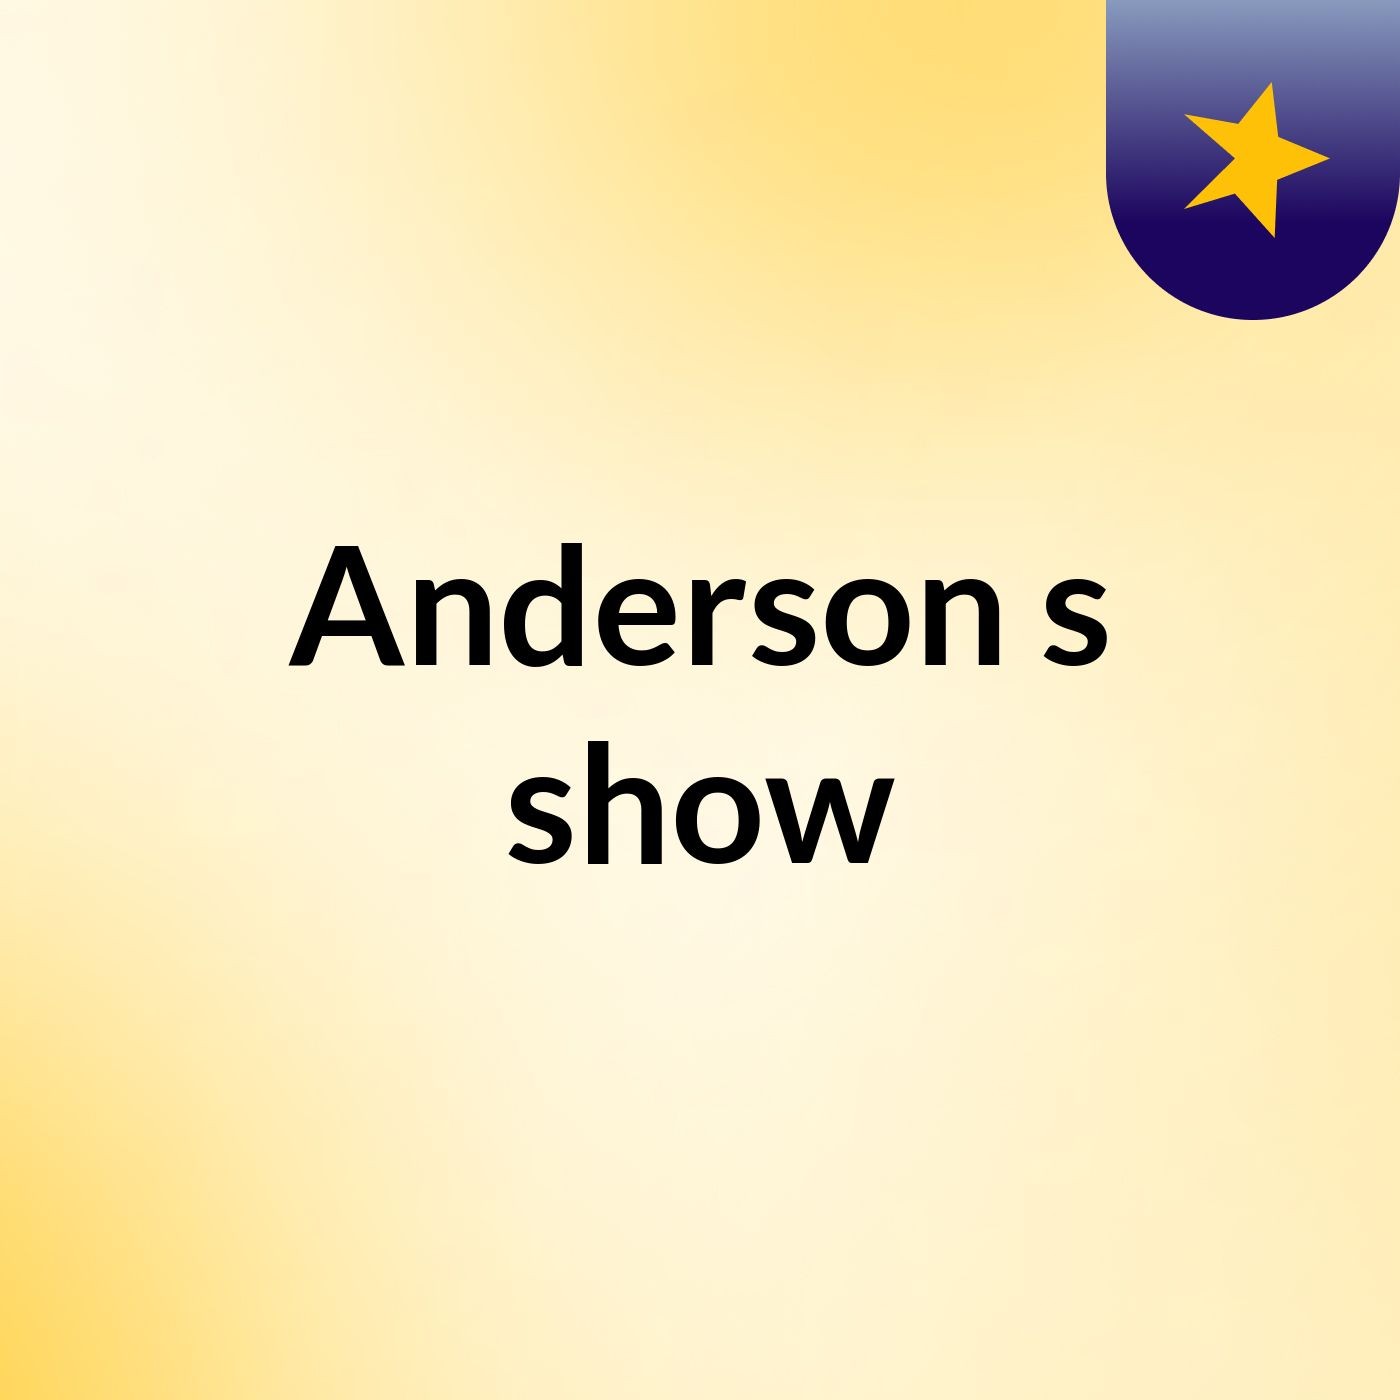 Anderson's show